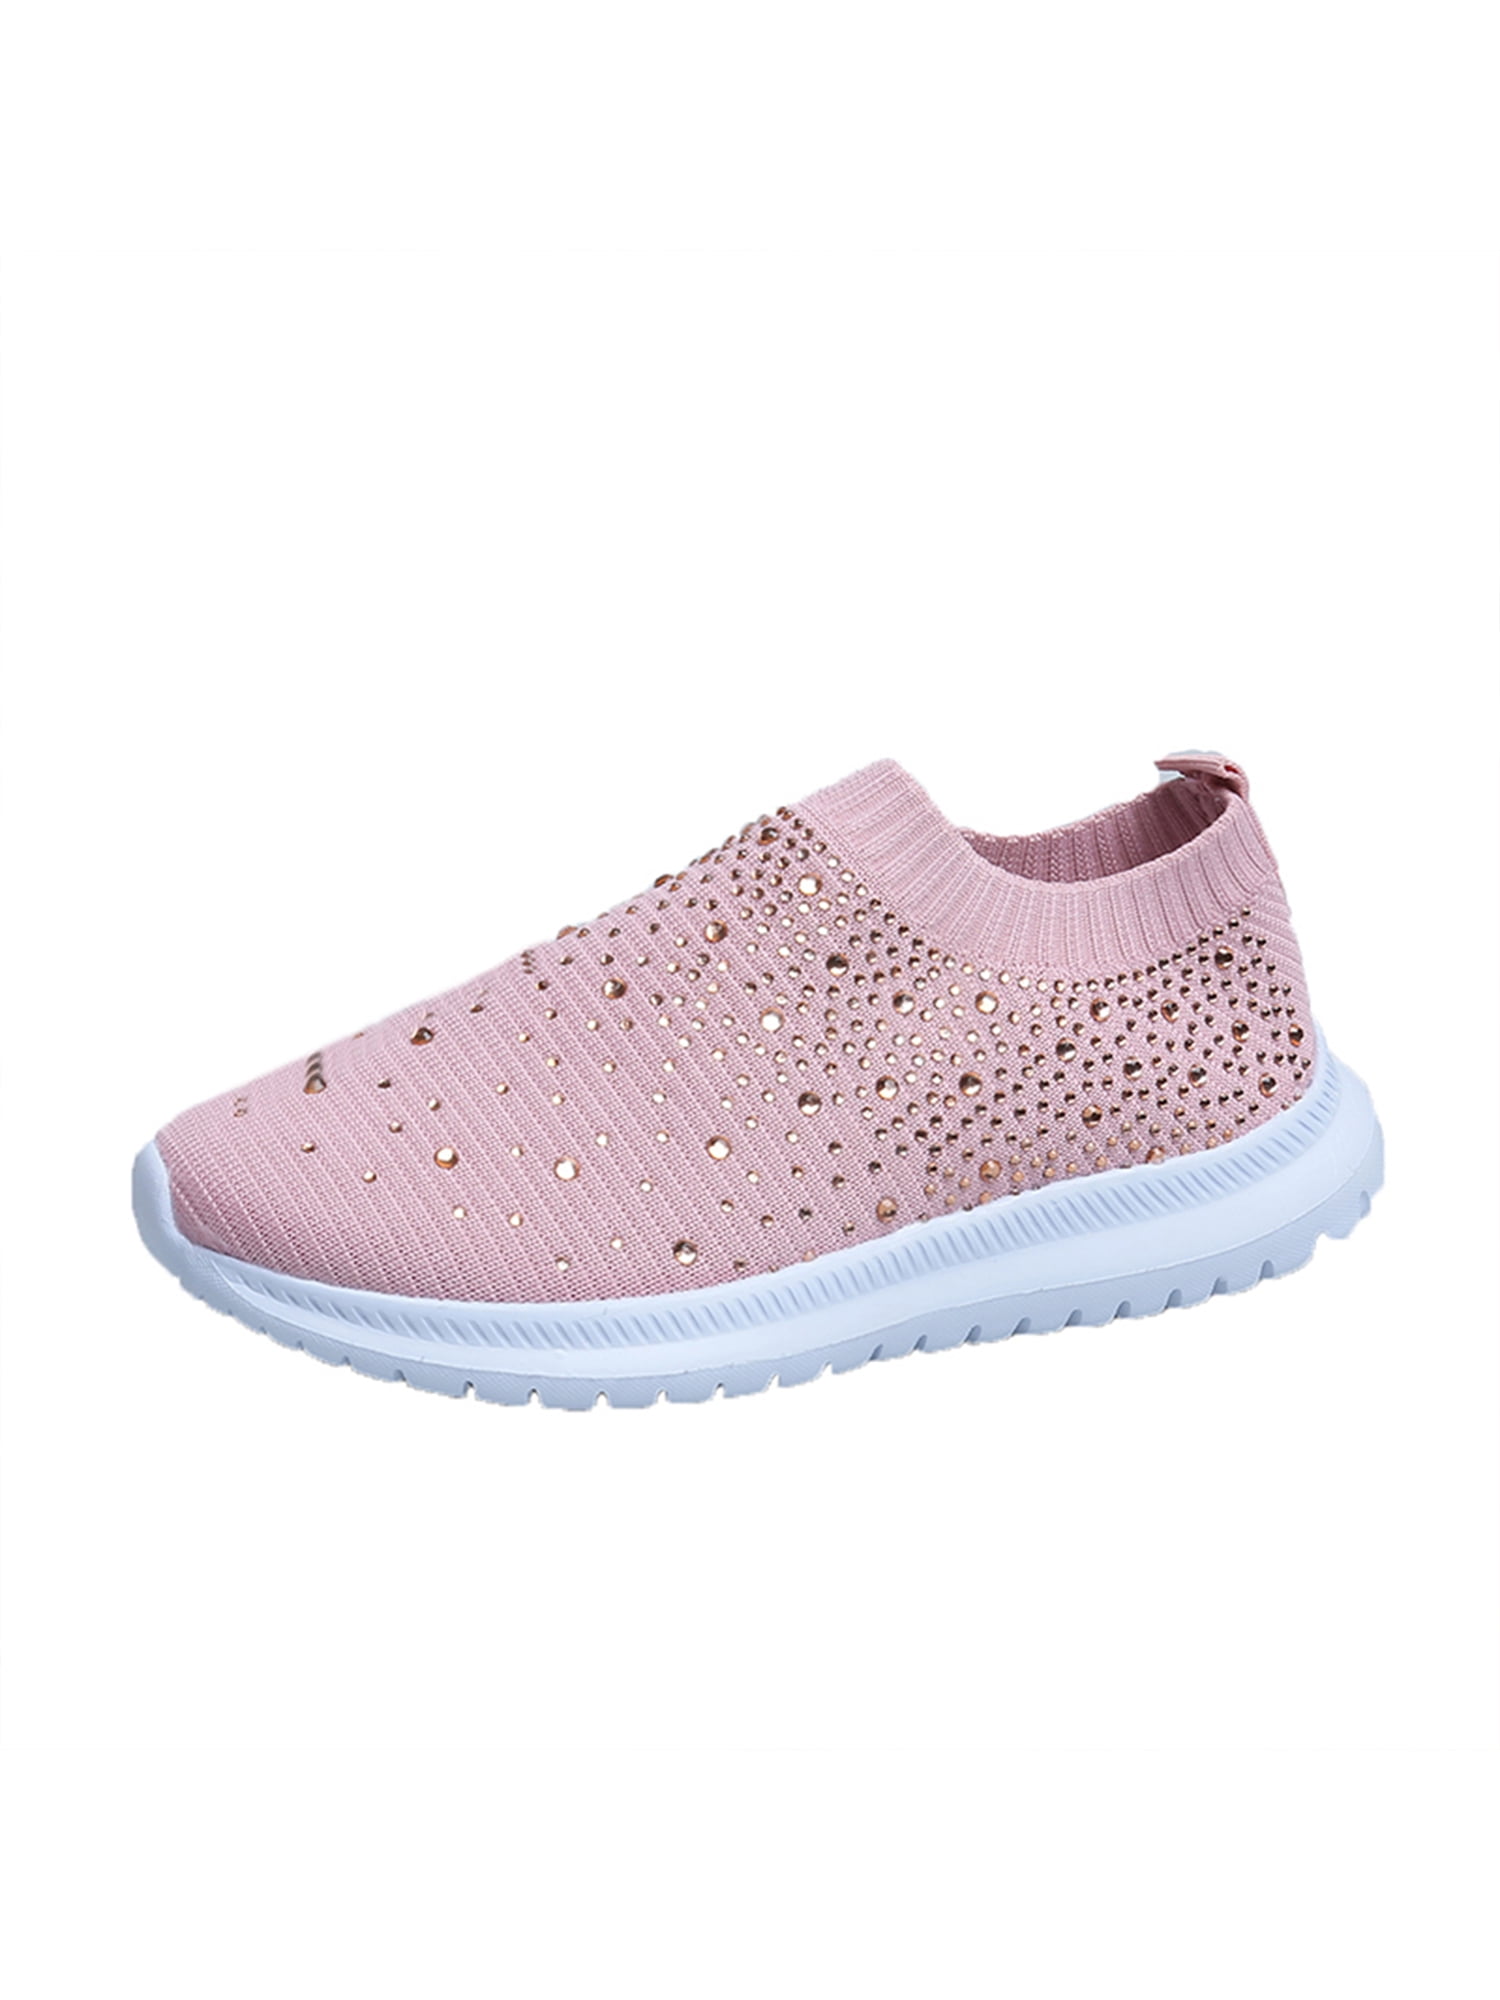 Details about   Womens Sequin Glitter Running Sneakers Ladies Casual Lace Up Trainers Shoes New